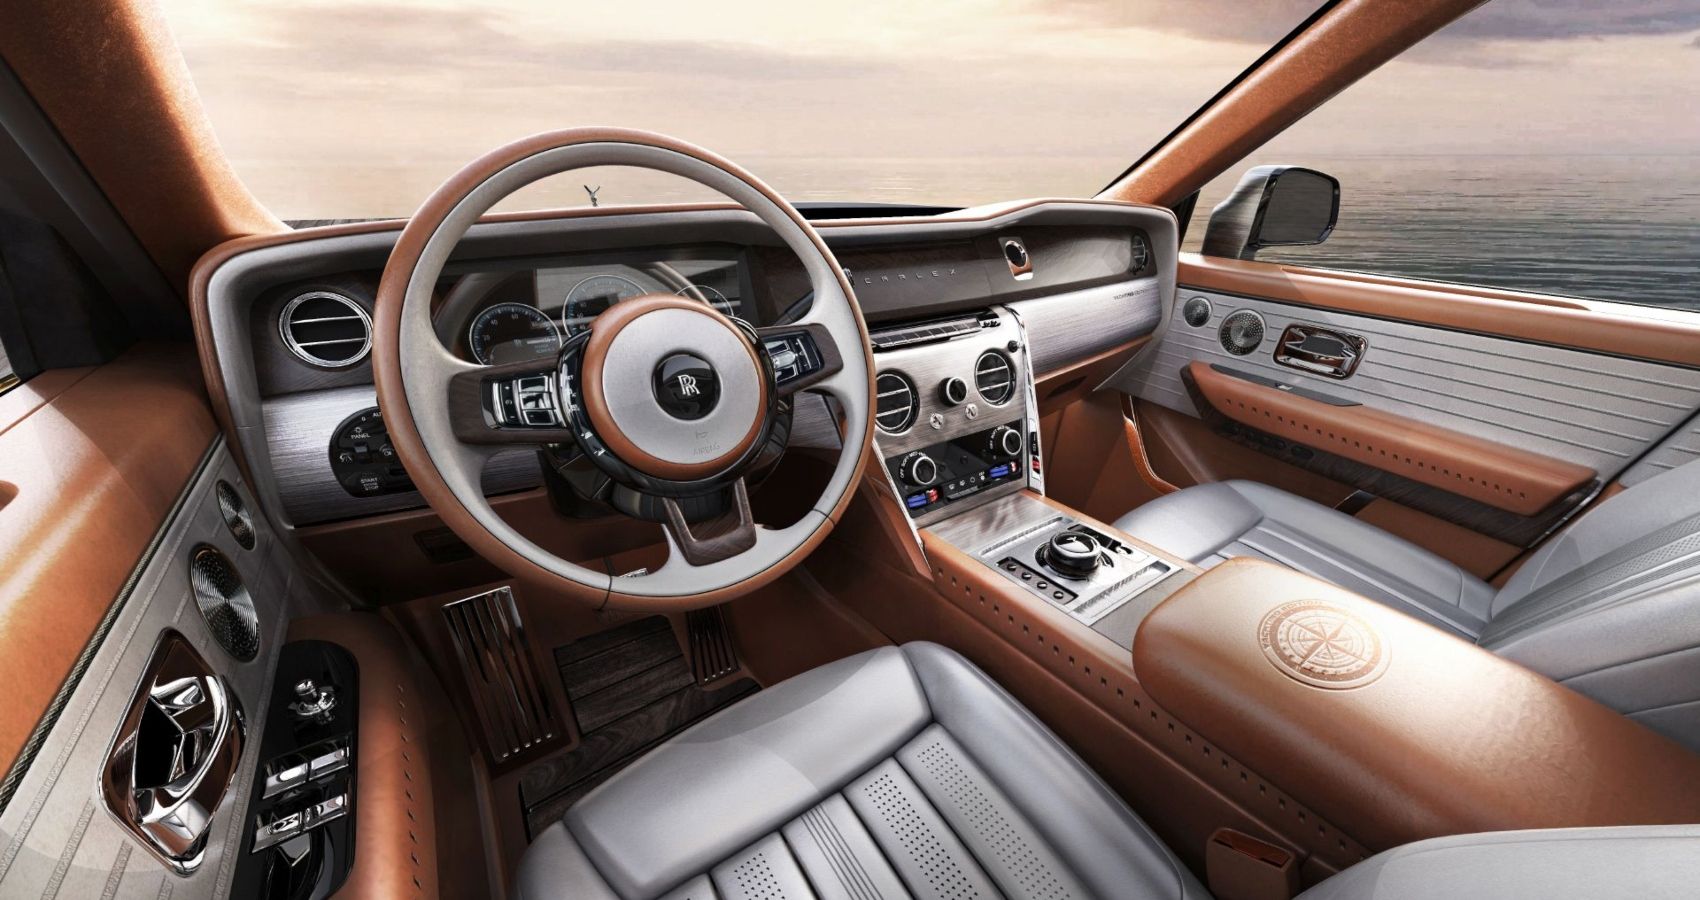 Front dashboard view of Rolls Royce Cullinan Yachting Edition by Carlex Design